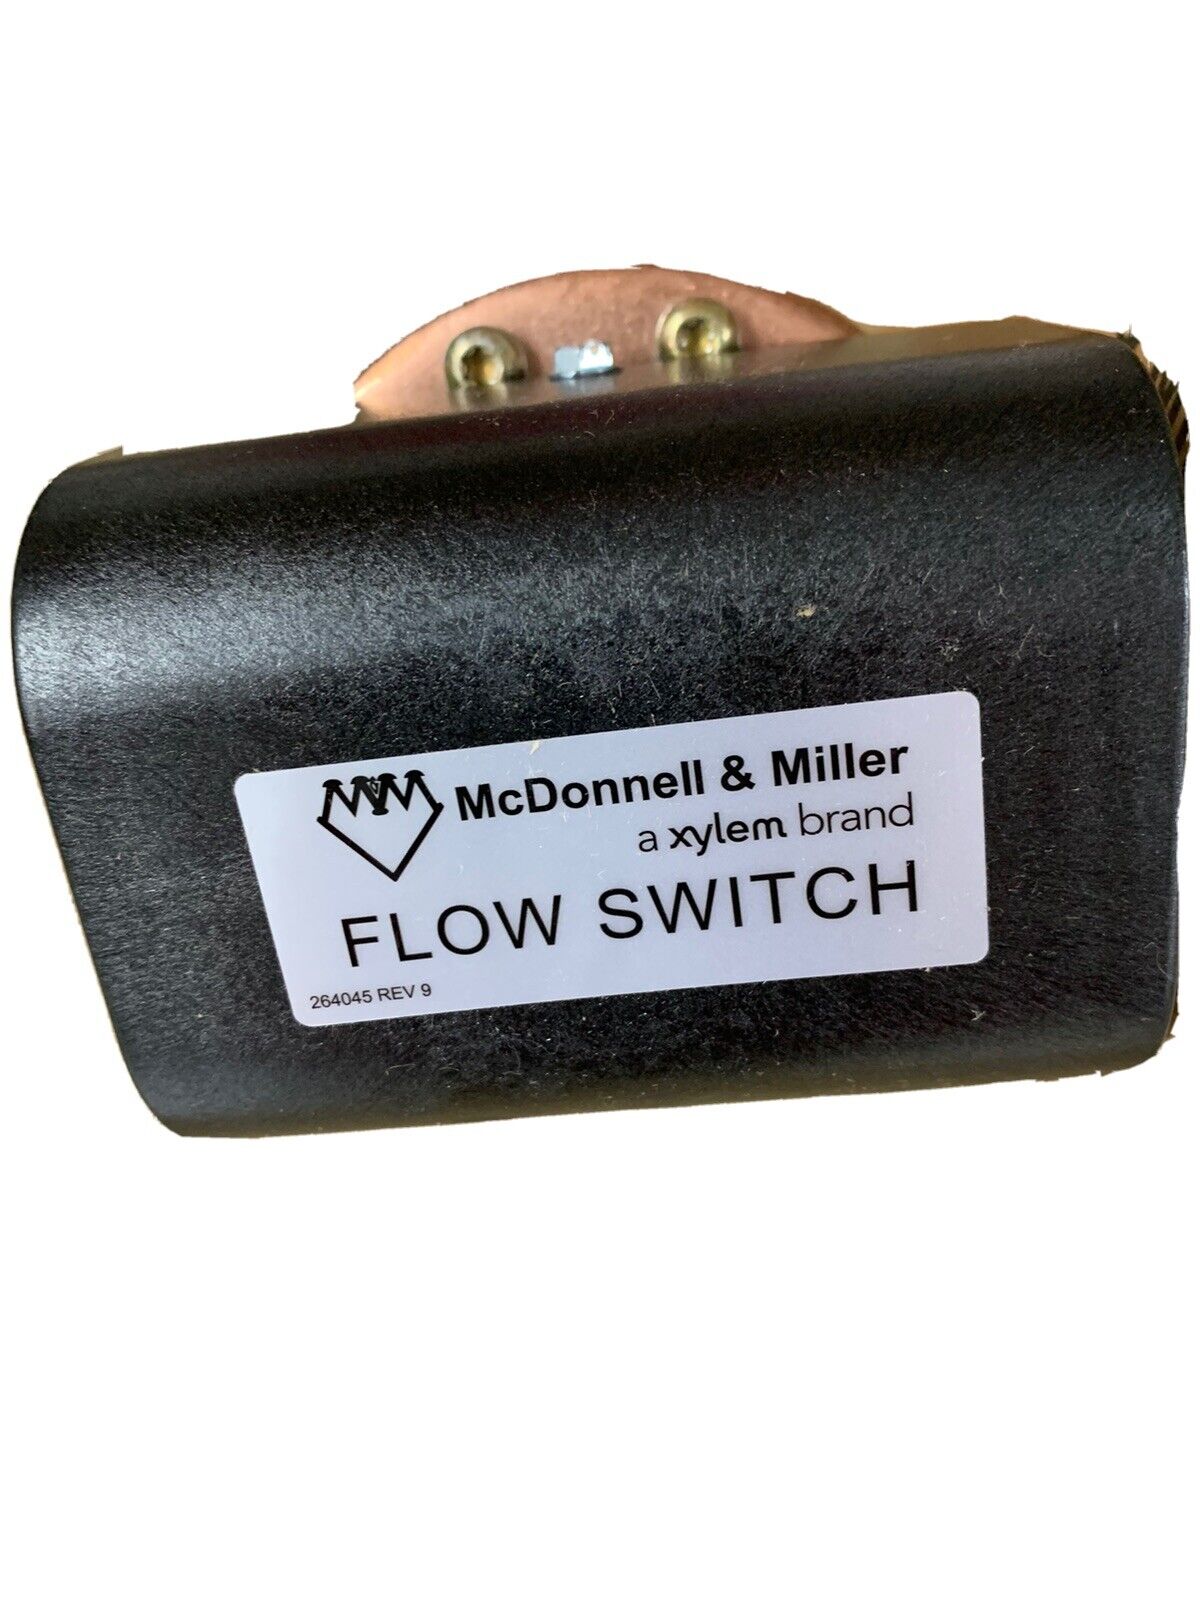 Mcdonnell and Miller 1 inch Flow Switch NEW IN BOX